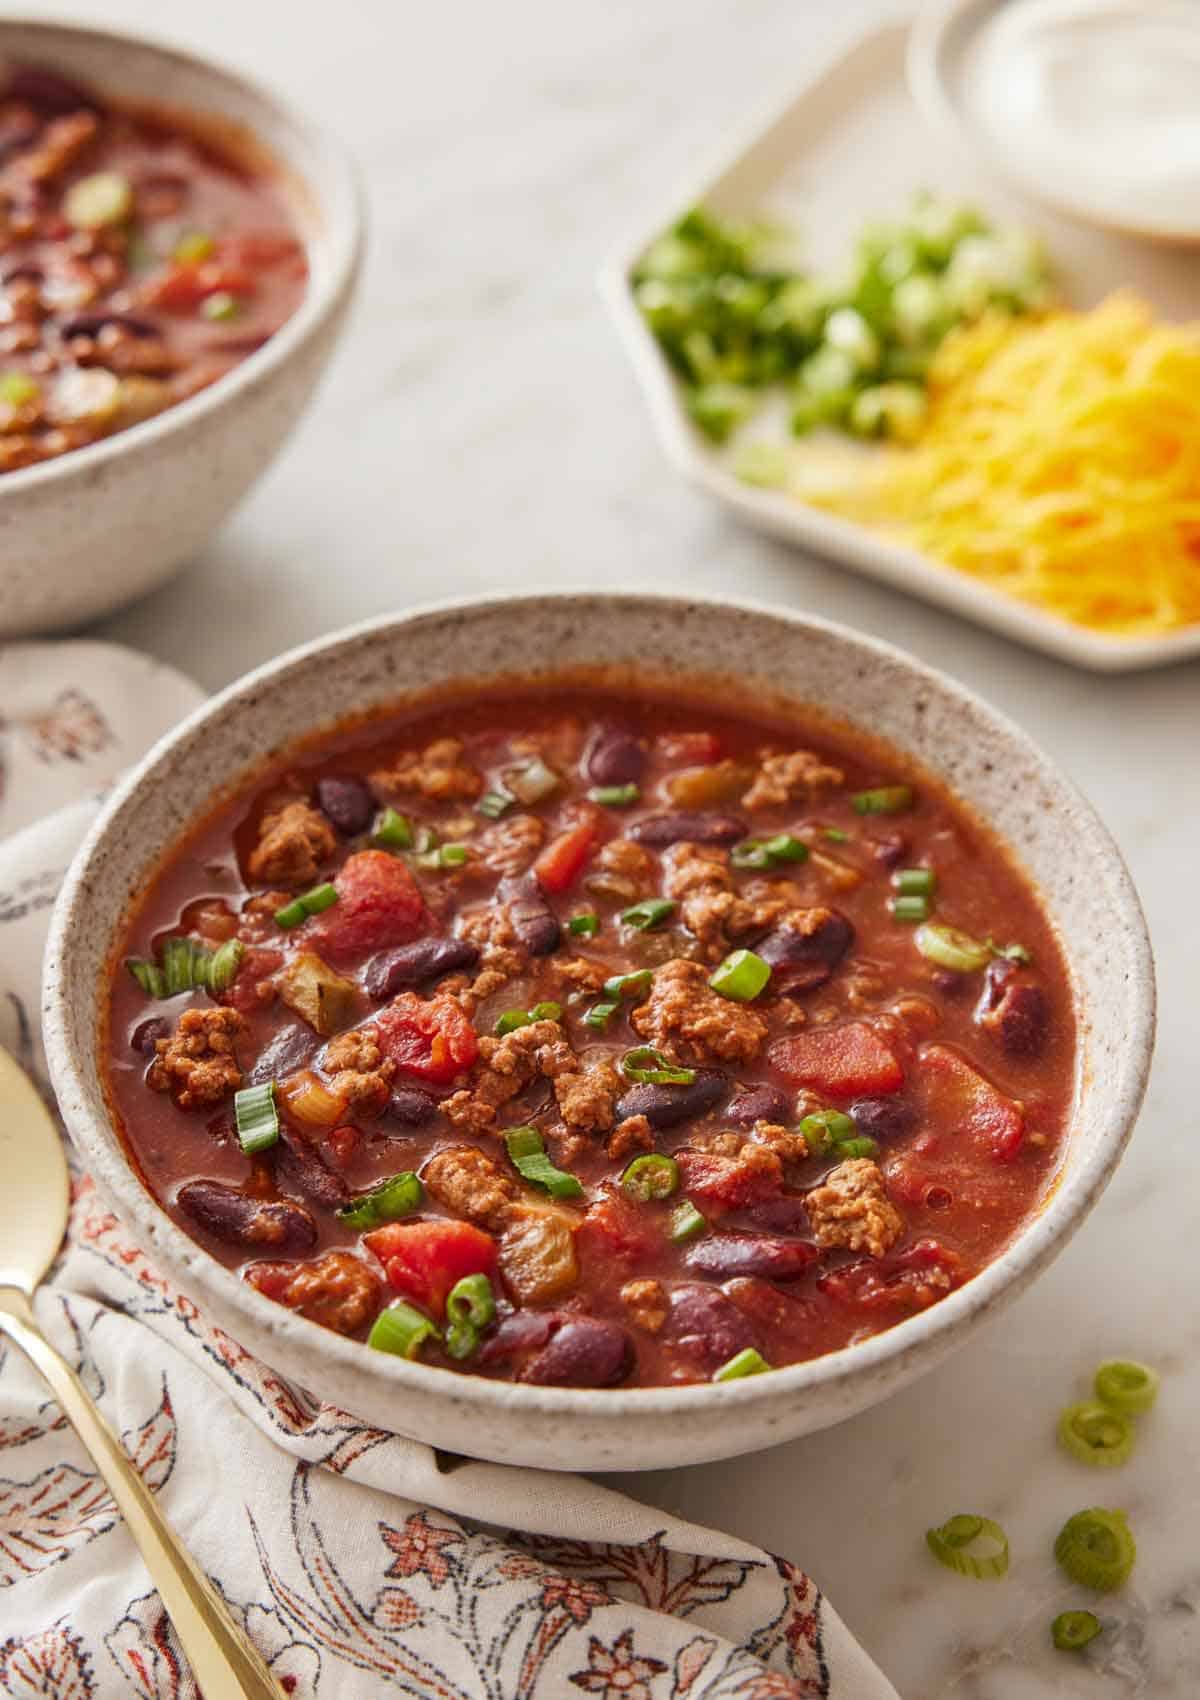 A bowl of slow cooker chili with toppings in the background, out of focus.